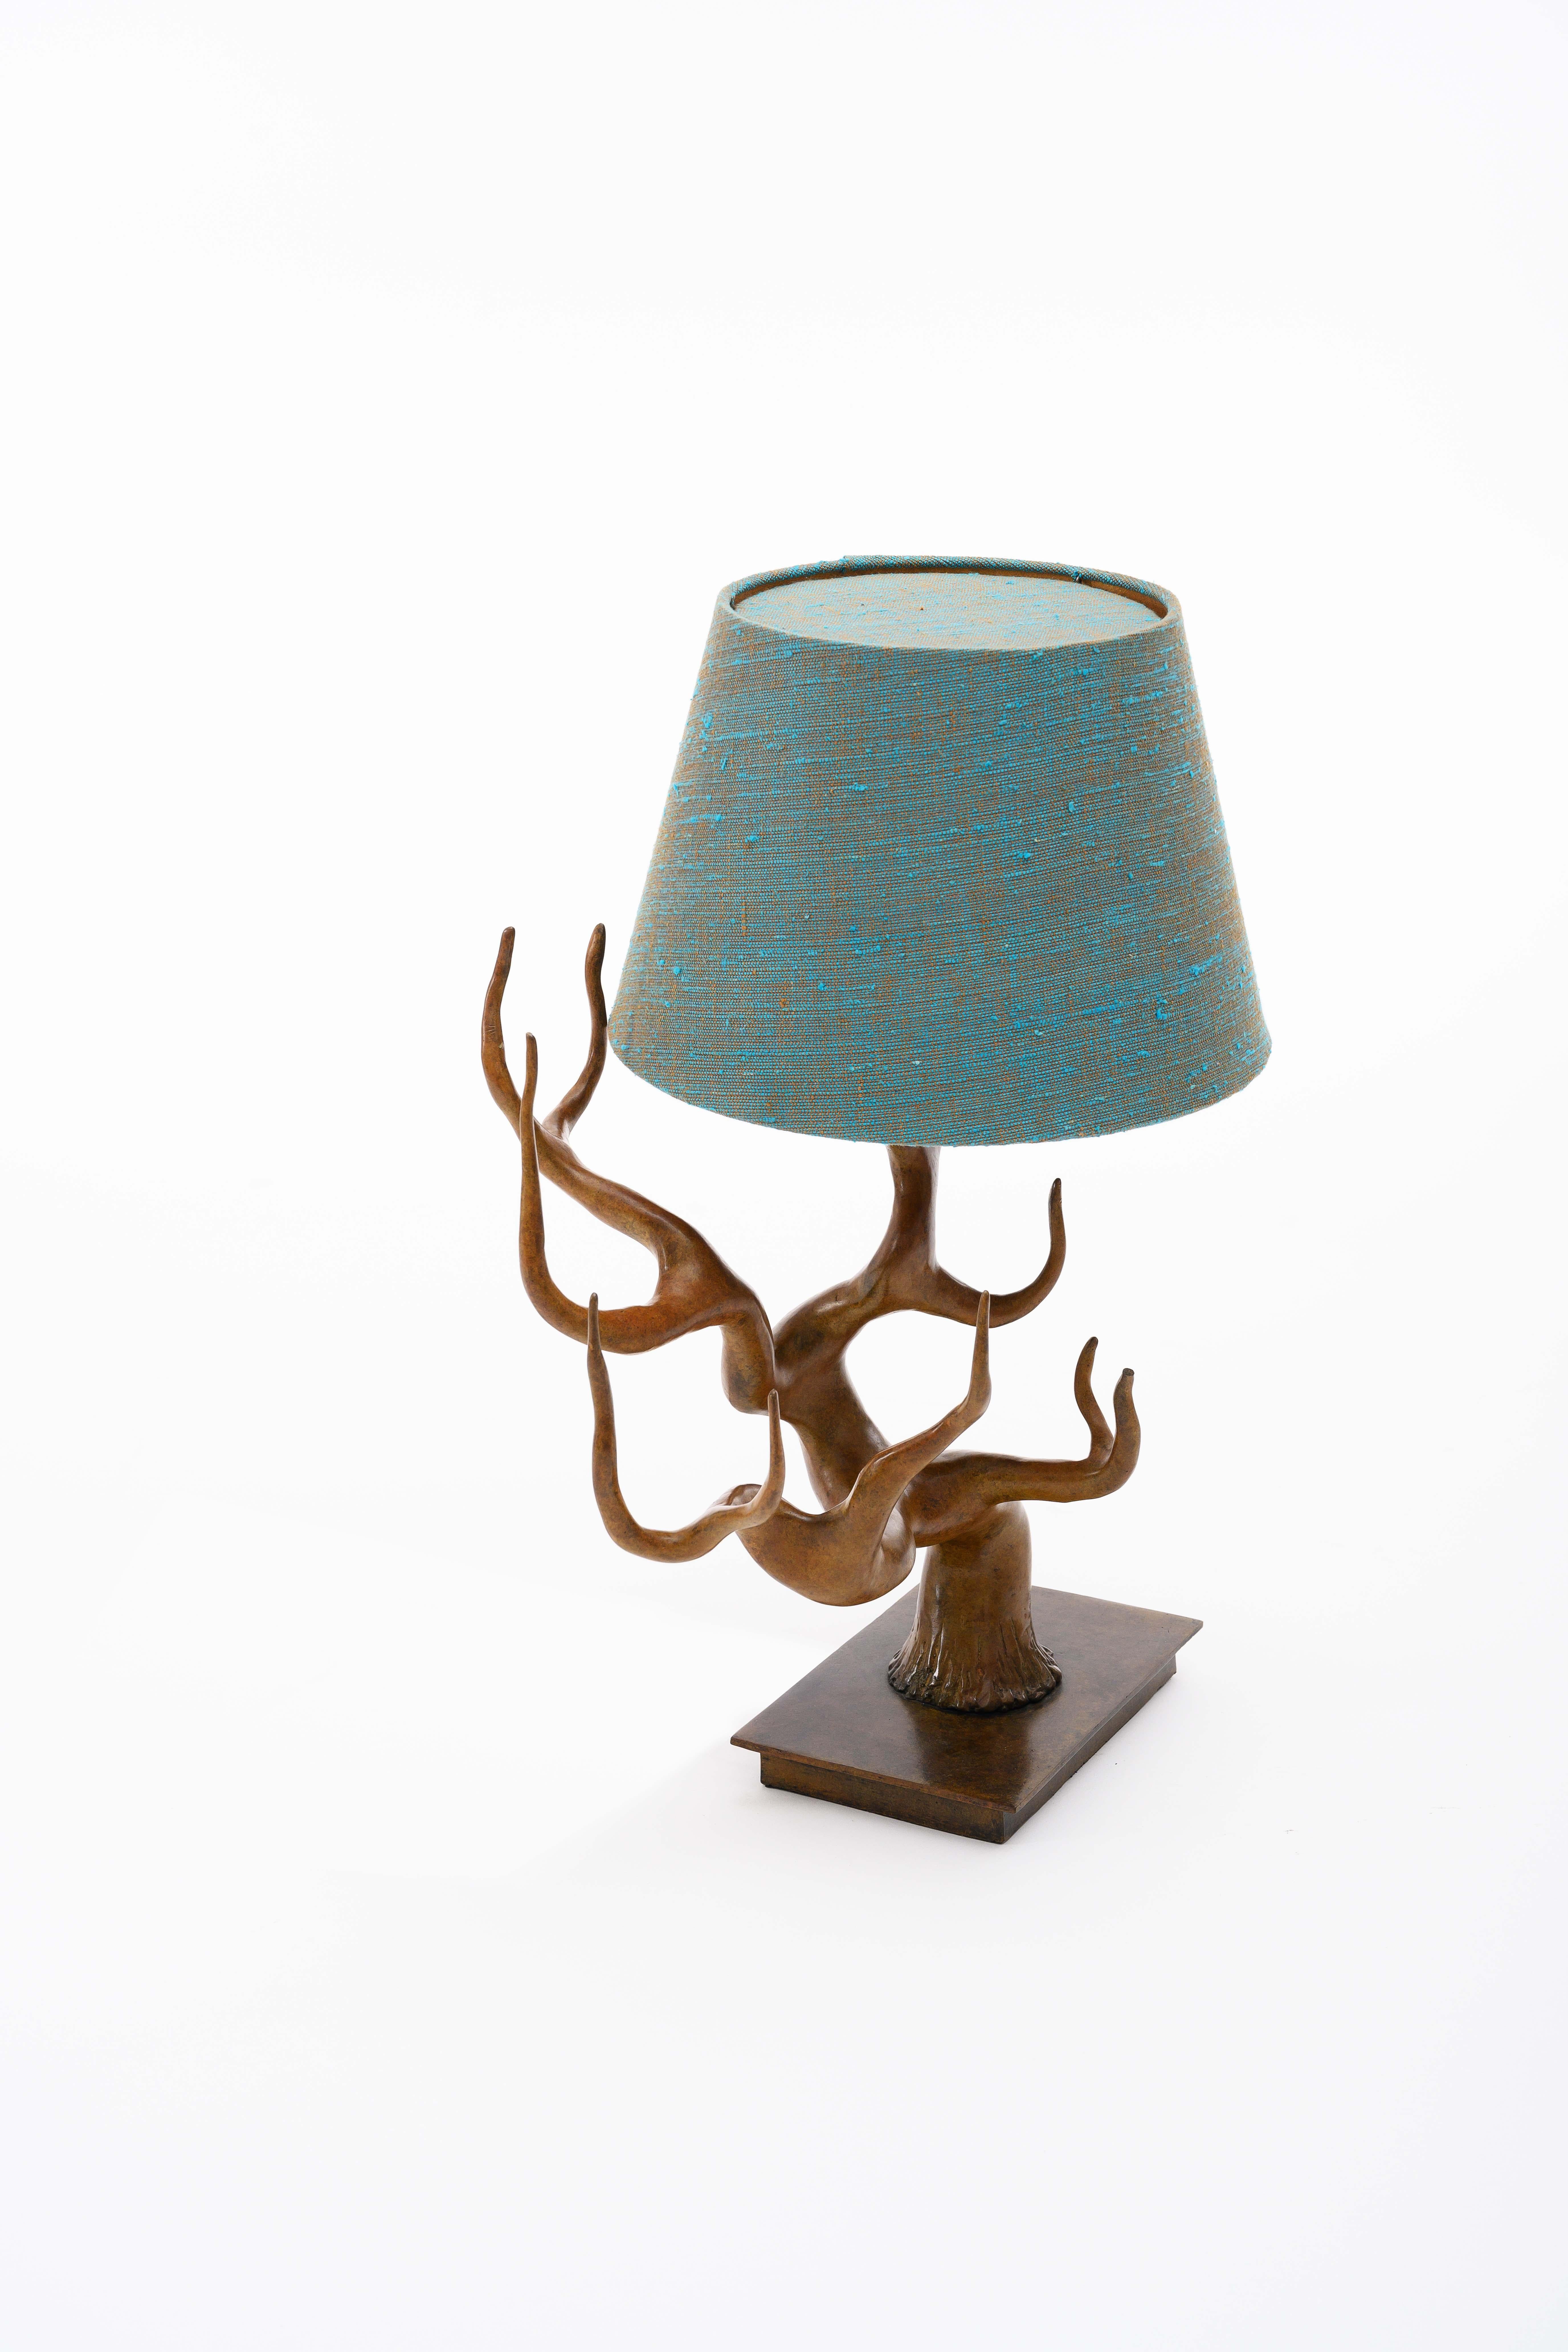 Cast Bronze Cervus Table Lamp with Blue Green Linen Shade by Elan Atelier
 
Bronze lamp with marine linen shade with gold silk interior, produced using the superior lost wax bronze casting process, hand-rubbed and finished in selected patina.  